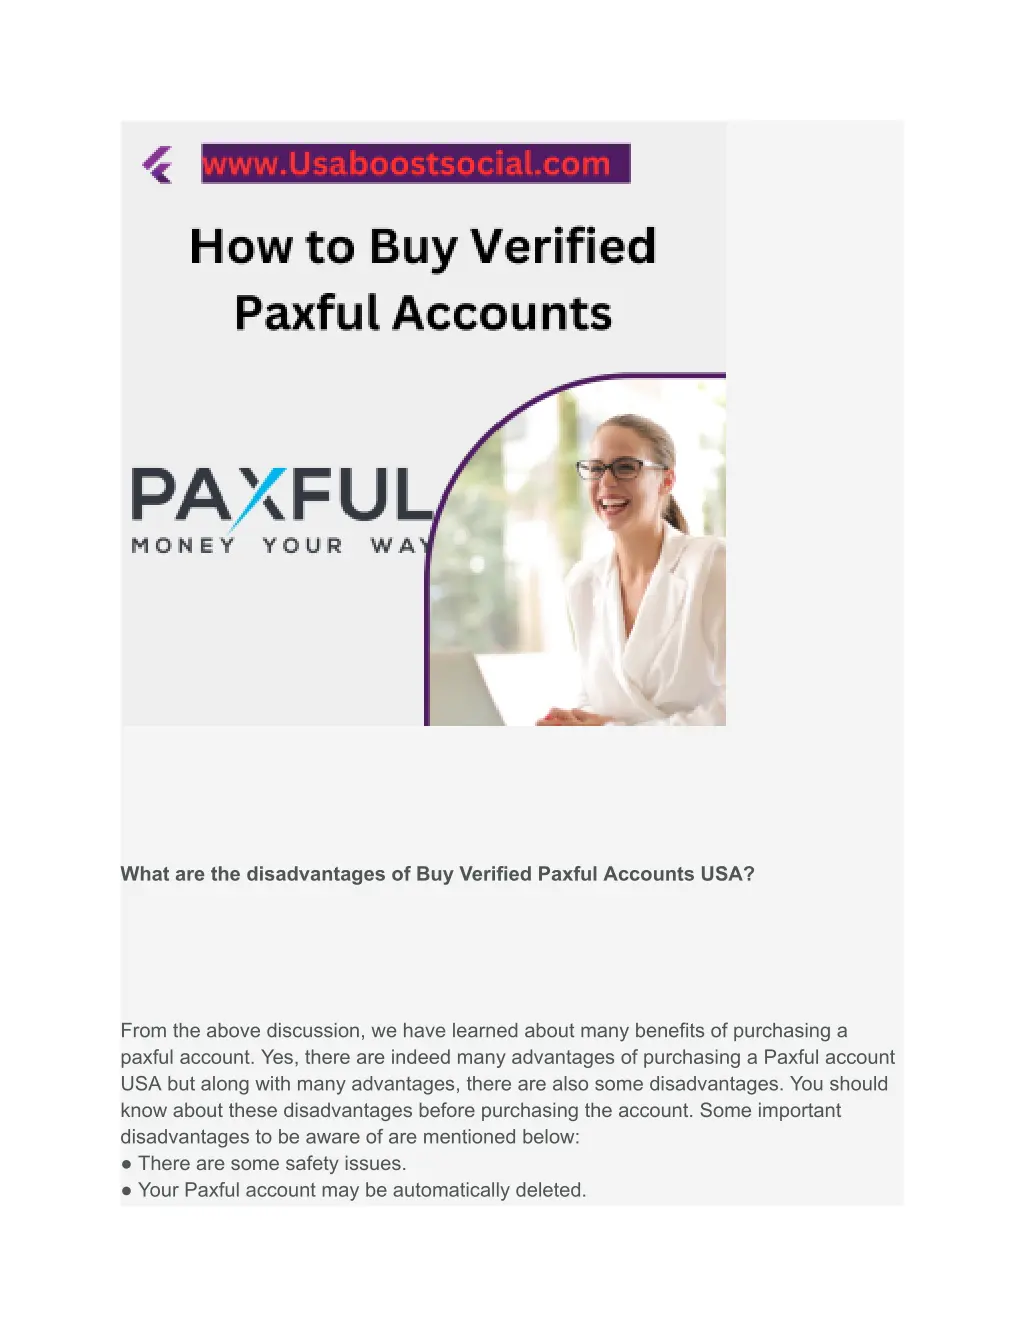 what are the disadvantages of buy verified paxful